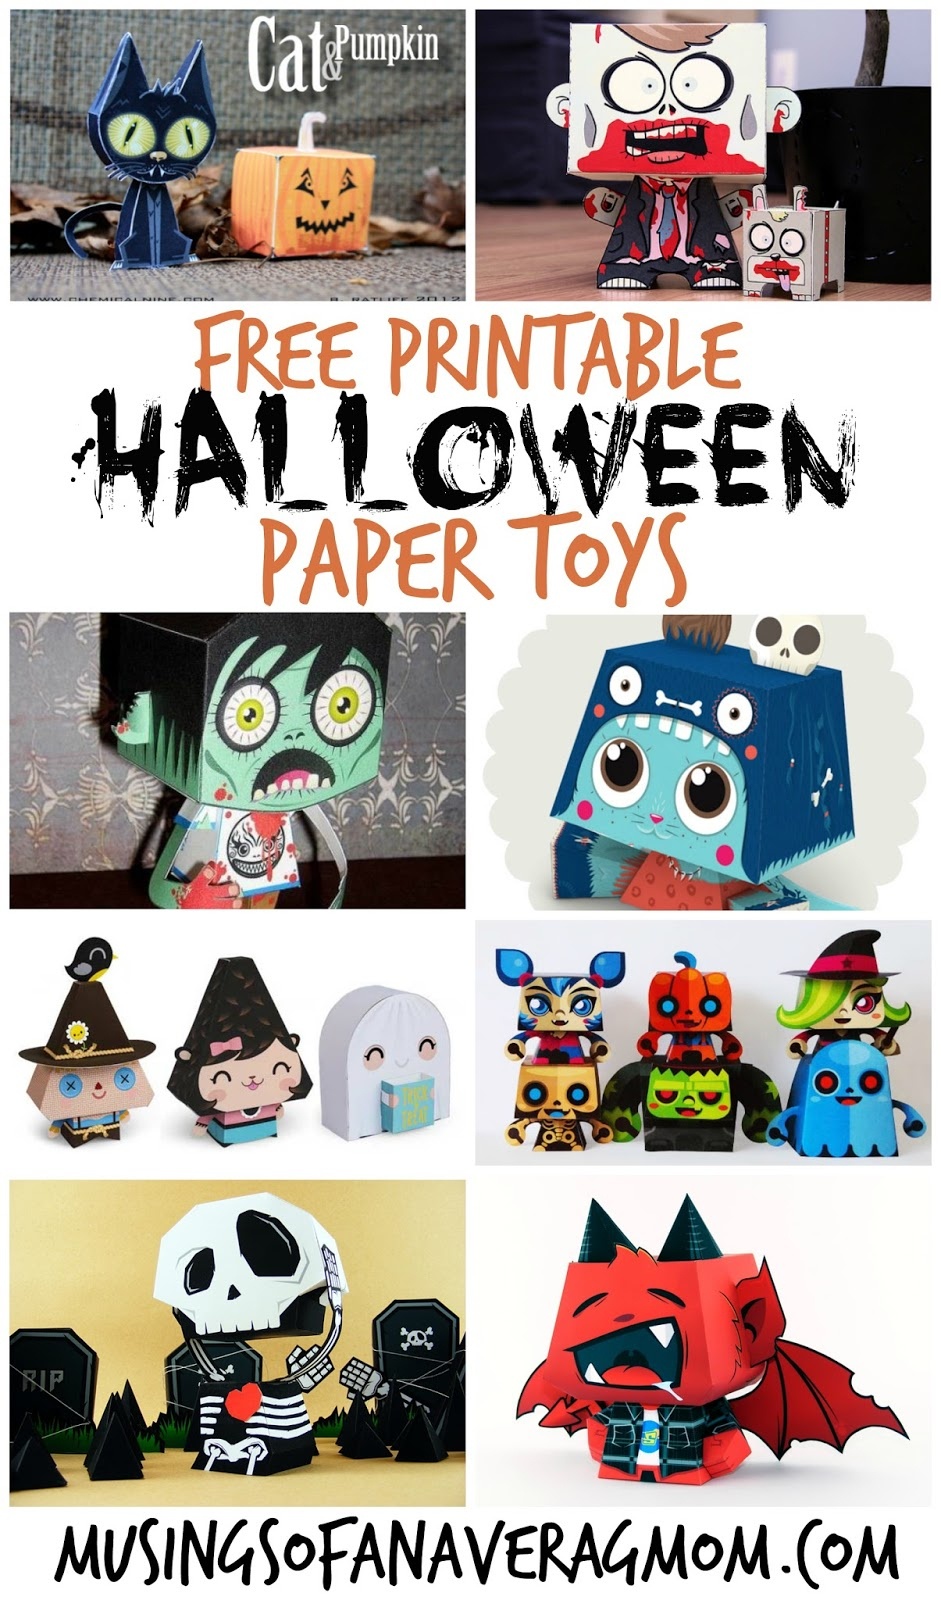 Musings Of An Average Mom: Halloween Paper Crafts - Free Printable Halloween Paper Crafts